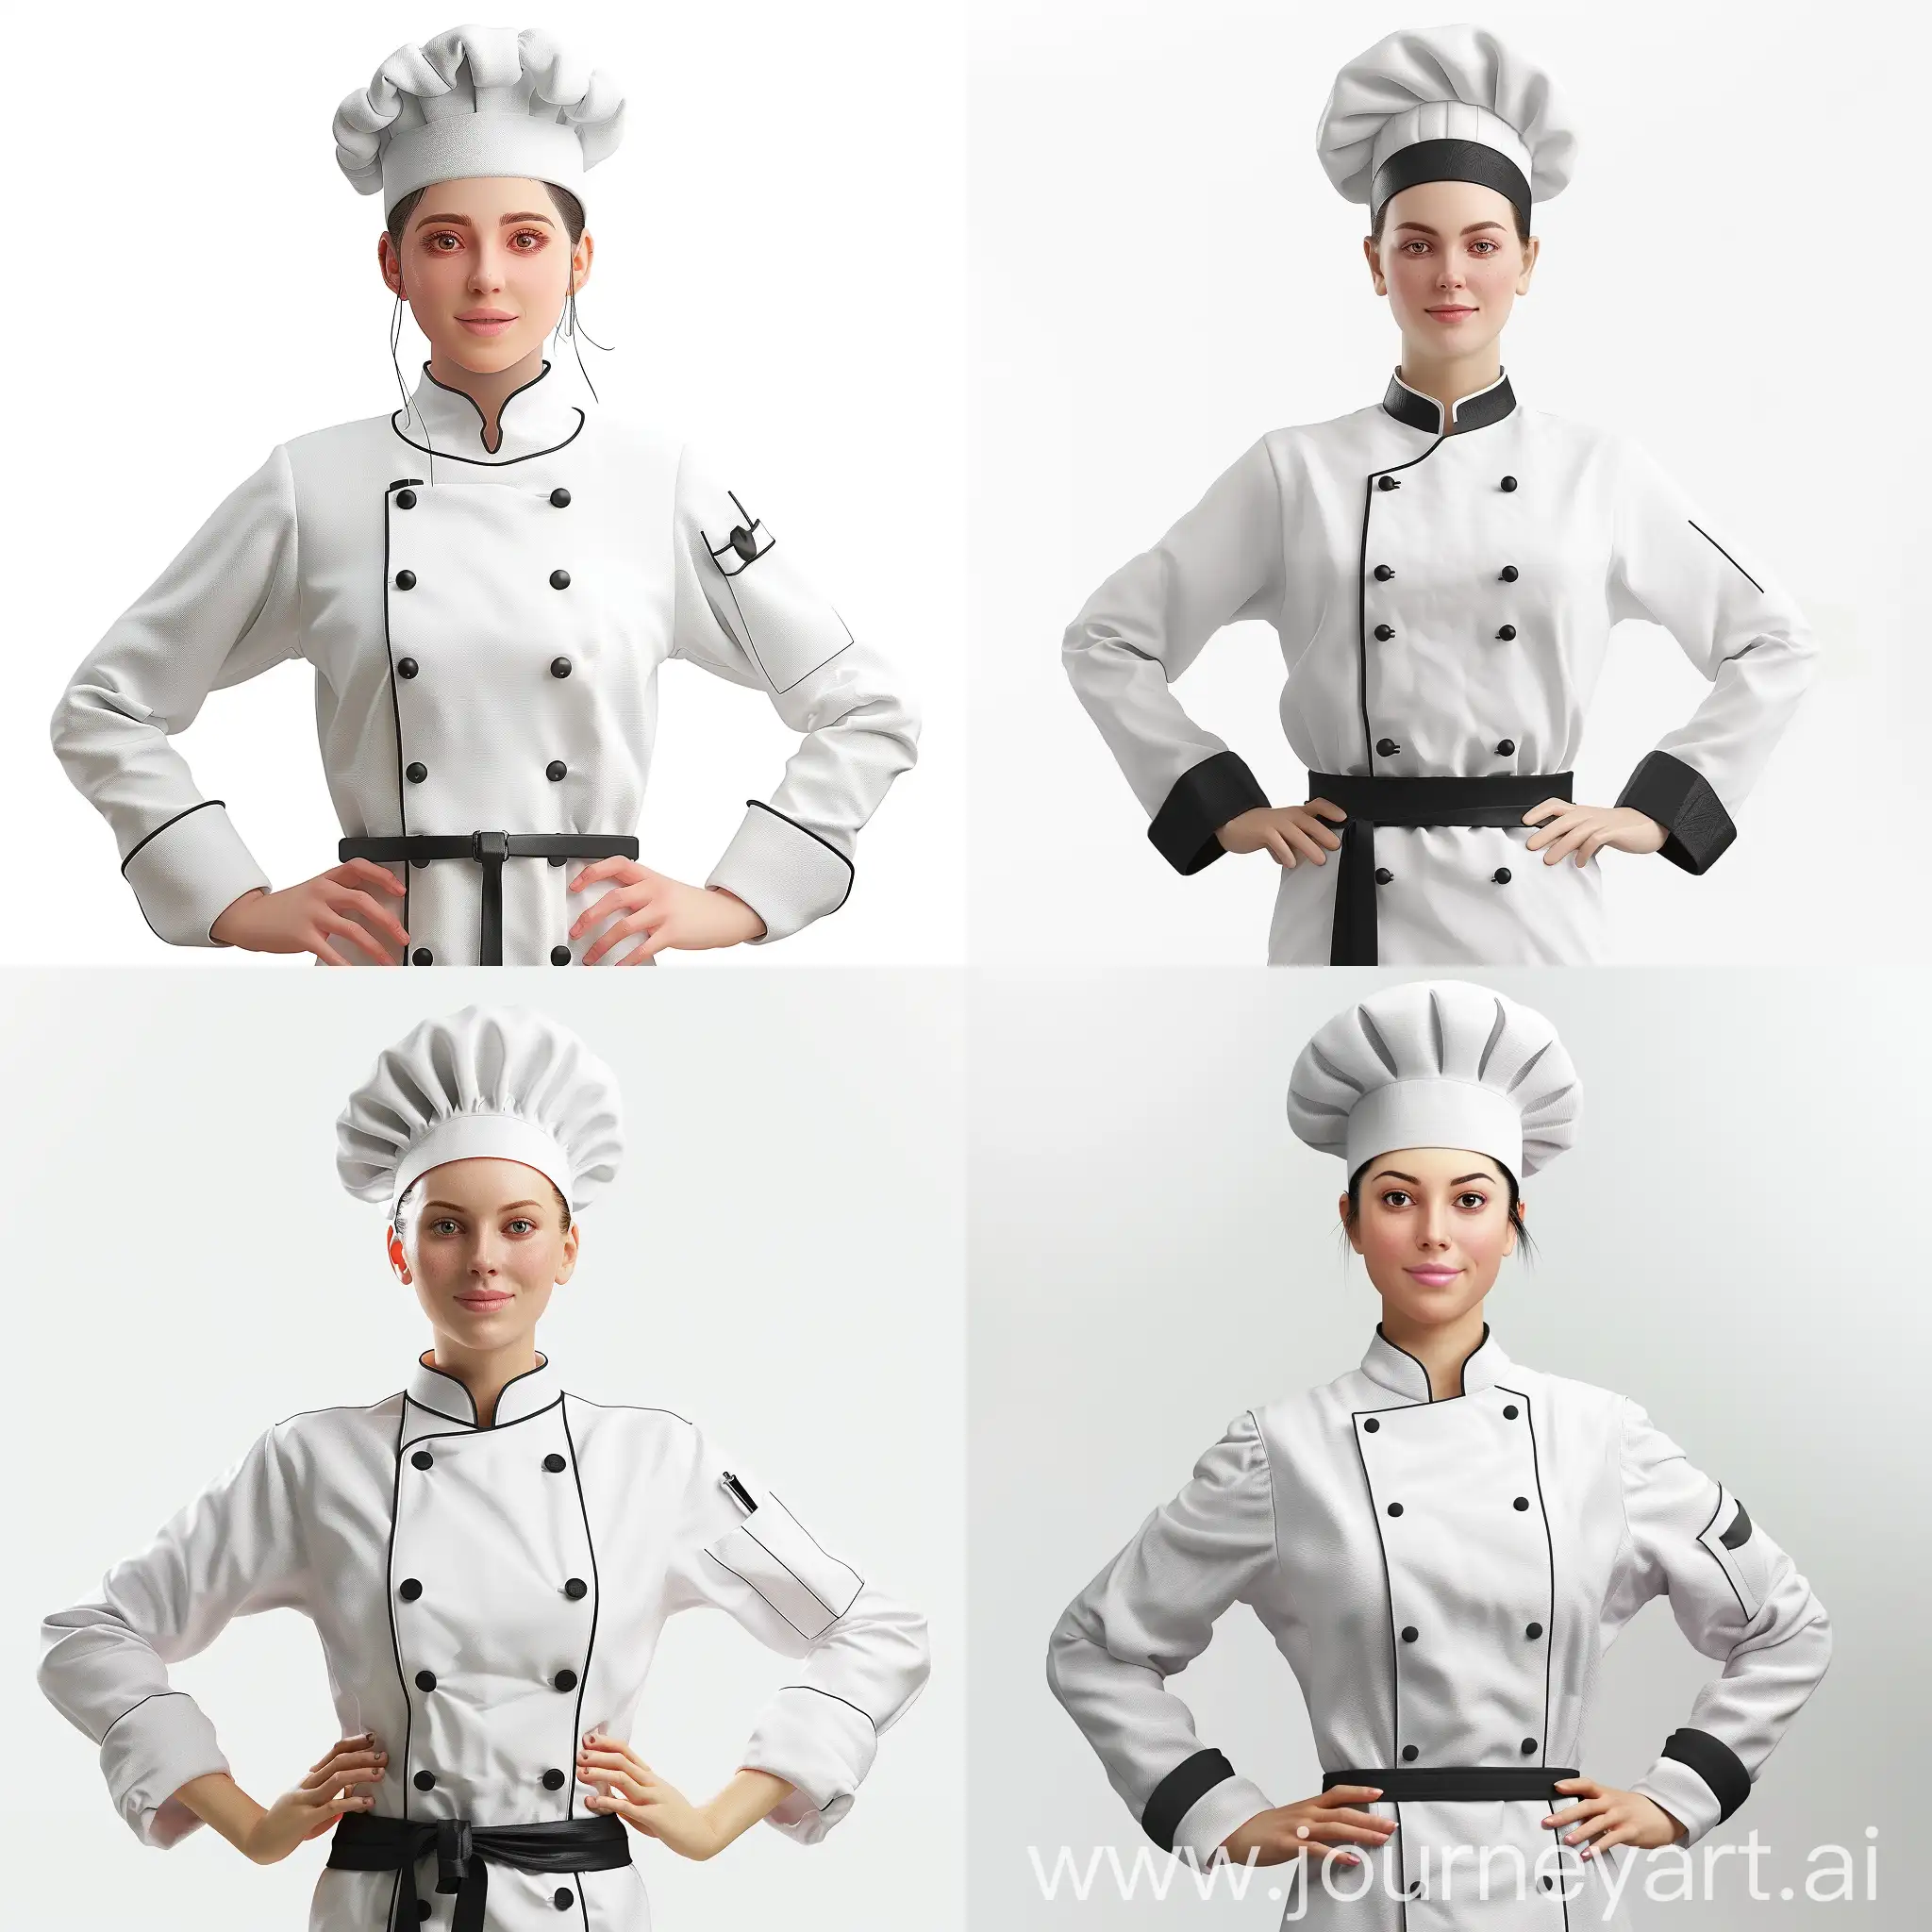 Create a realistic 3d portrait (Waist up) of a white female chef in chef attire on a white background